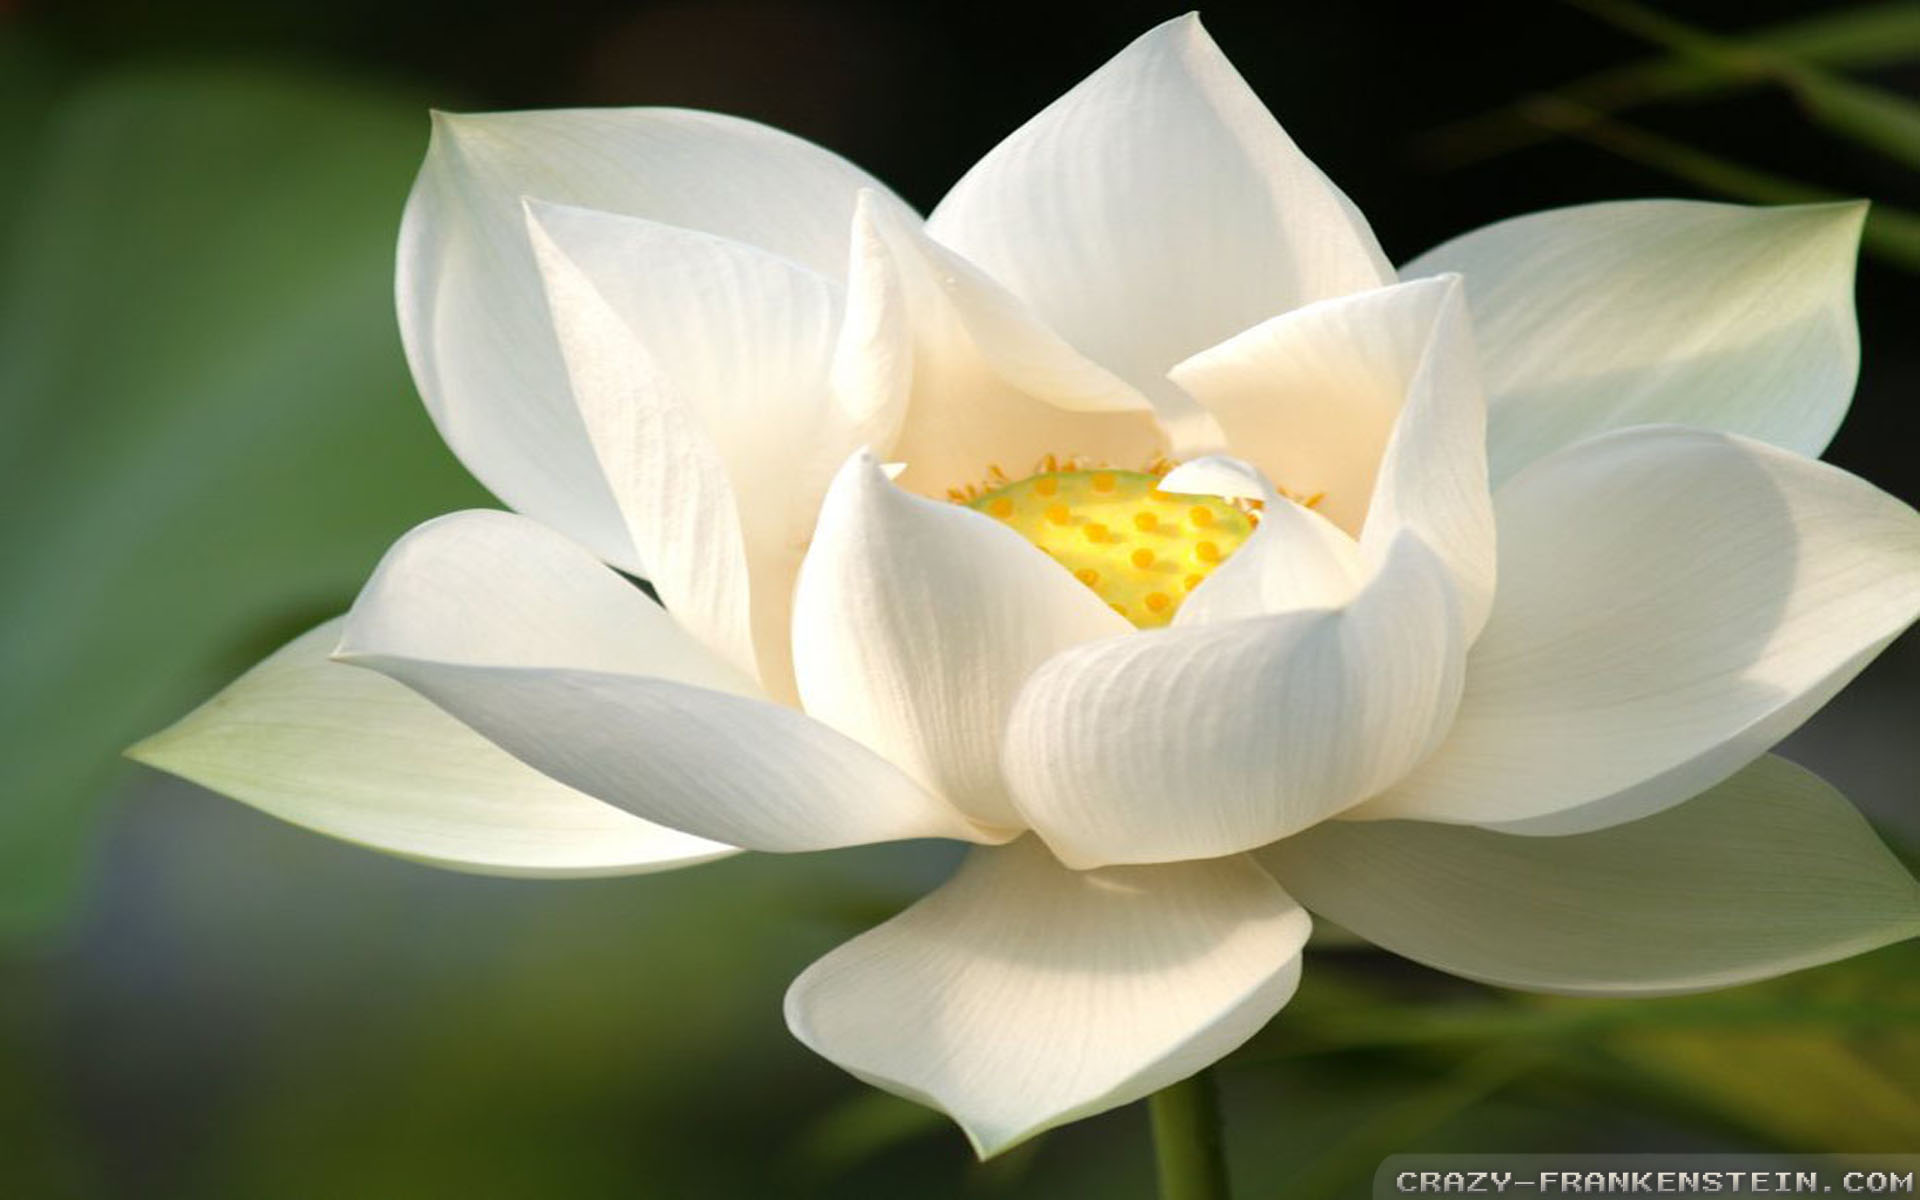 Wallpaper: Cute white lotus flower wallpapers. Resolution: 1024x768 | 1280x1024 | 1600x1200. Widescreen Res: 1440x900 | 1680x1050 | 1920x1200